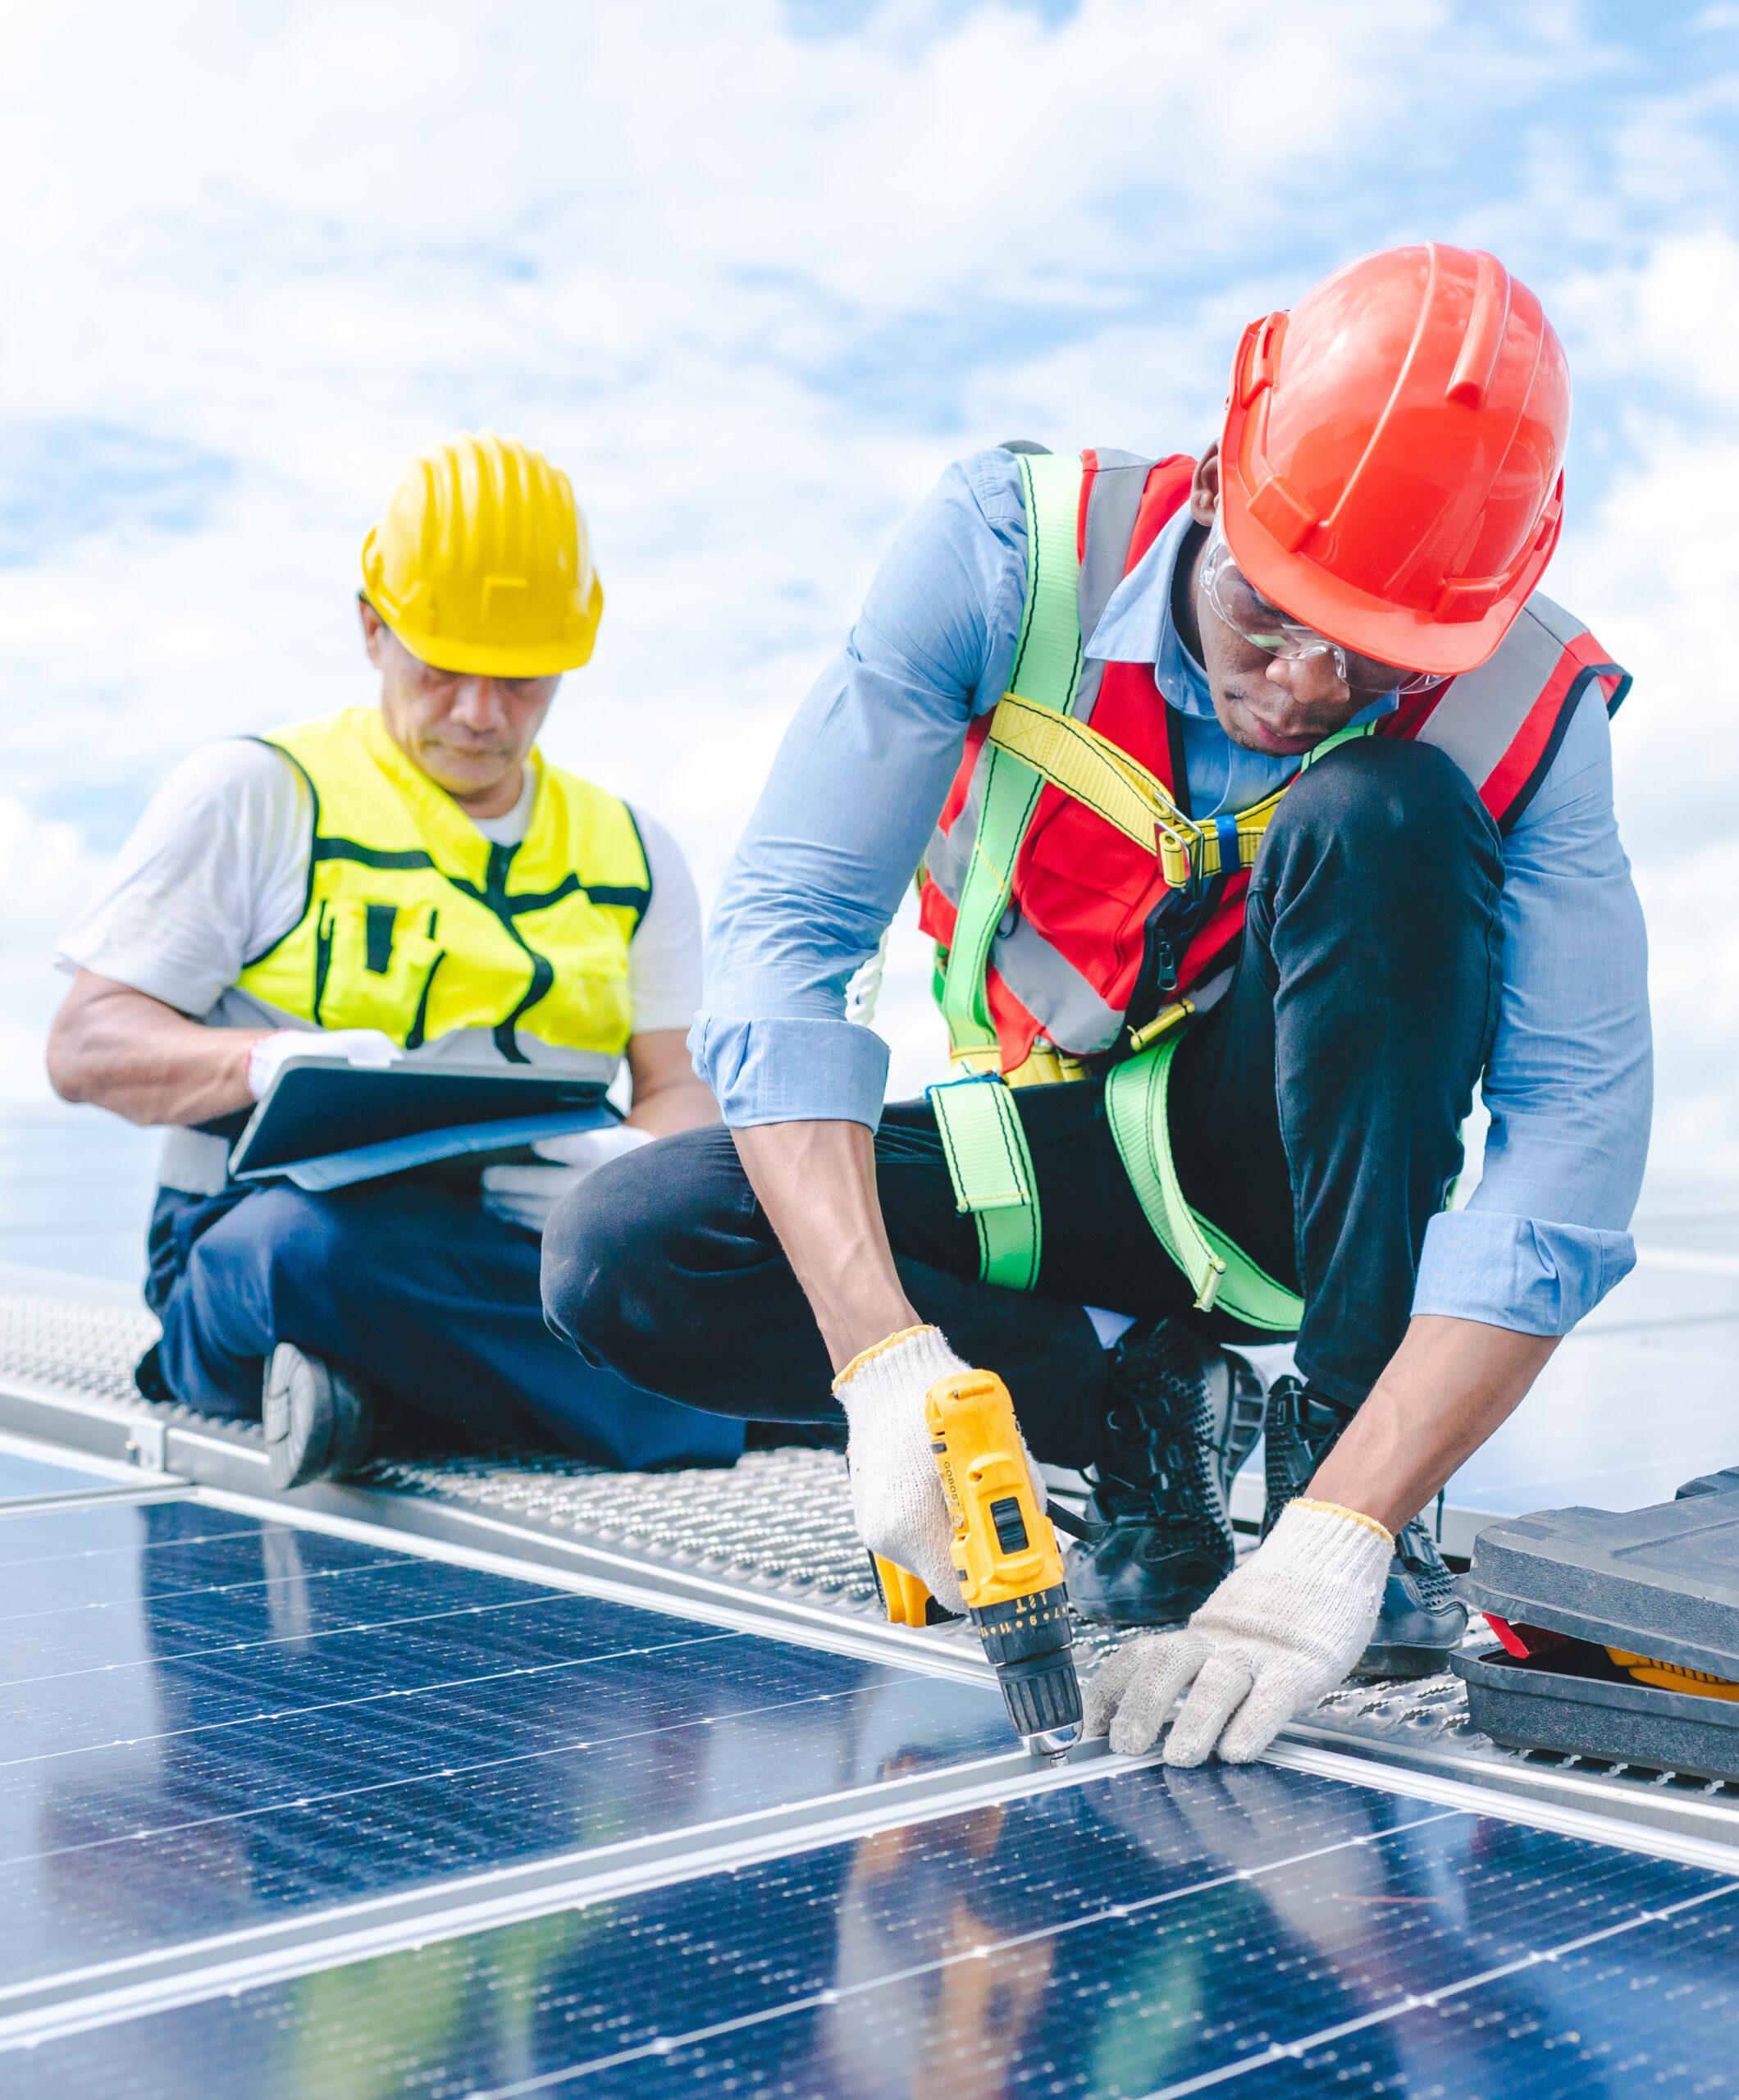 Two men in work hats and safety vests on a roof, one is using a drill on a solar panel, while the other is working on a tablet.